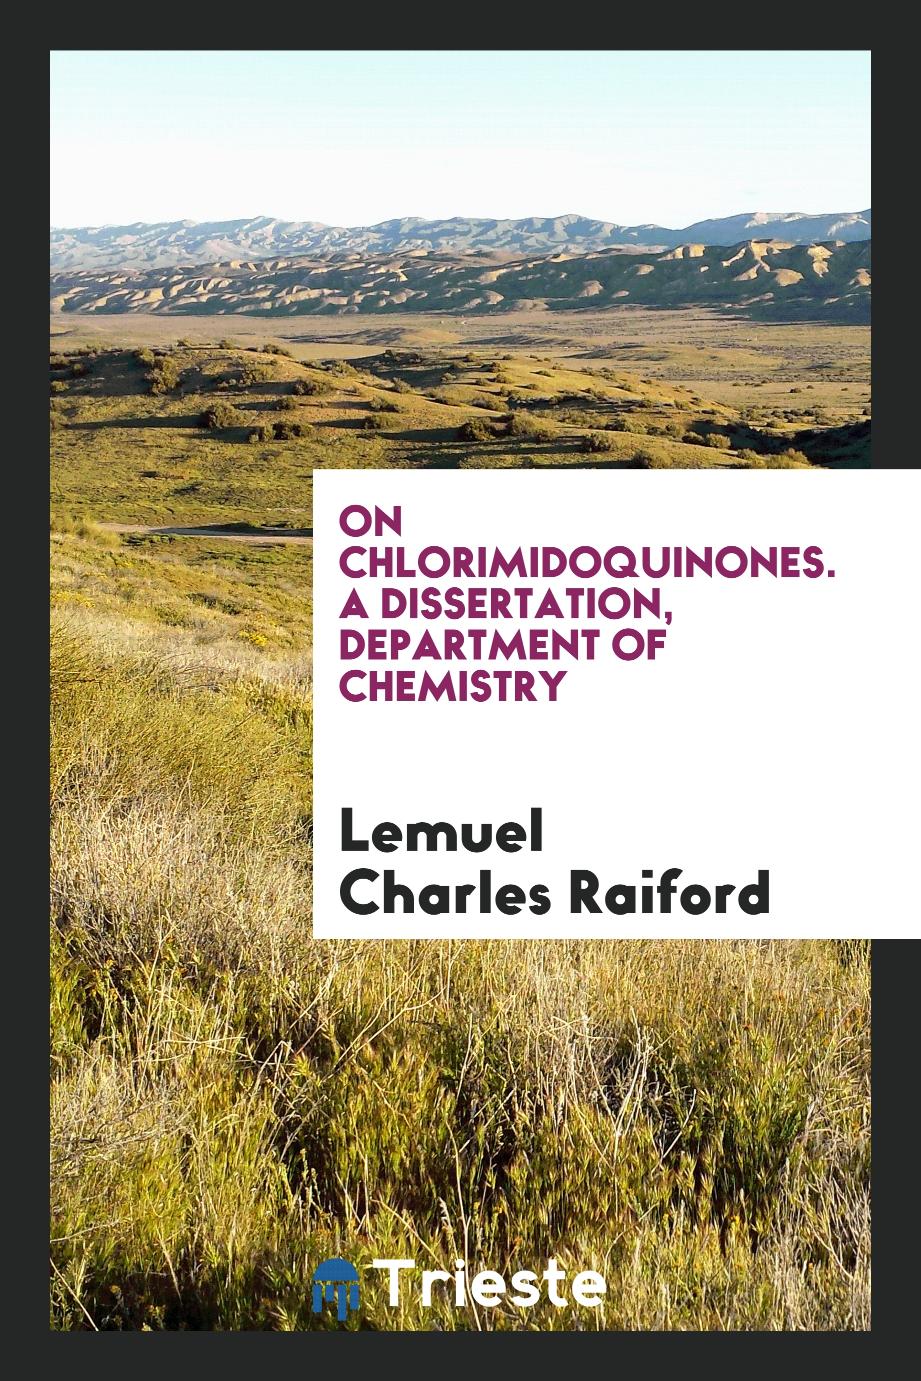 On chlorimidoquinones. A dissertation, department of chemistry